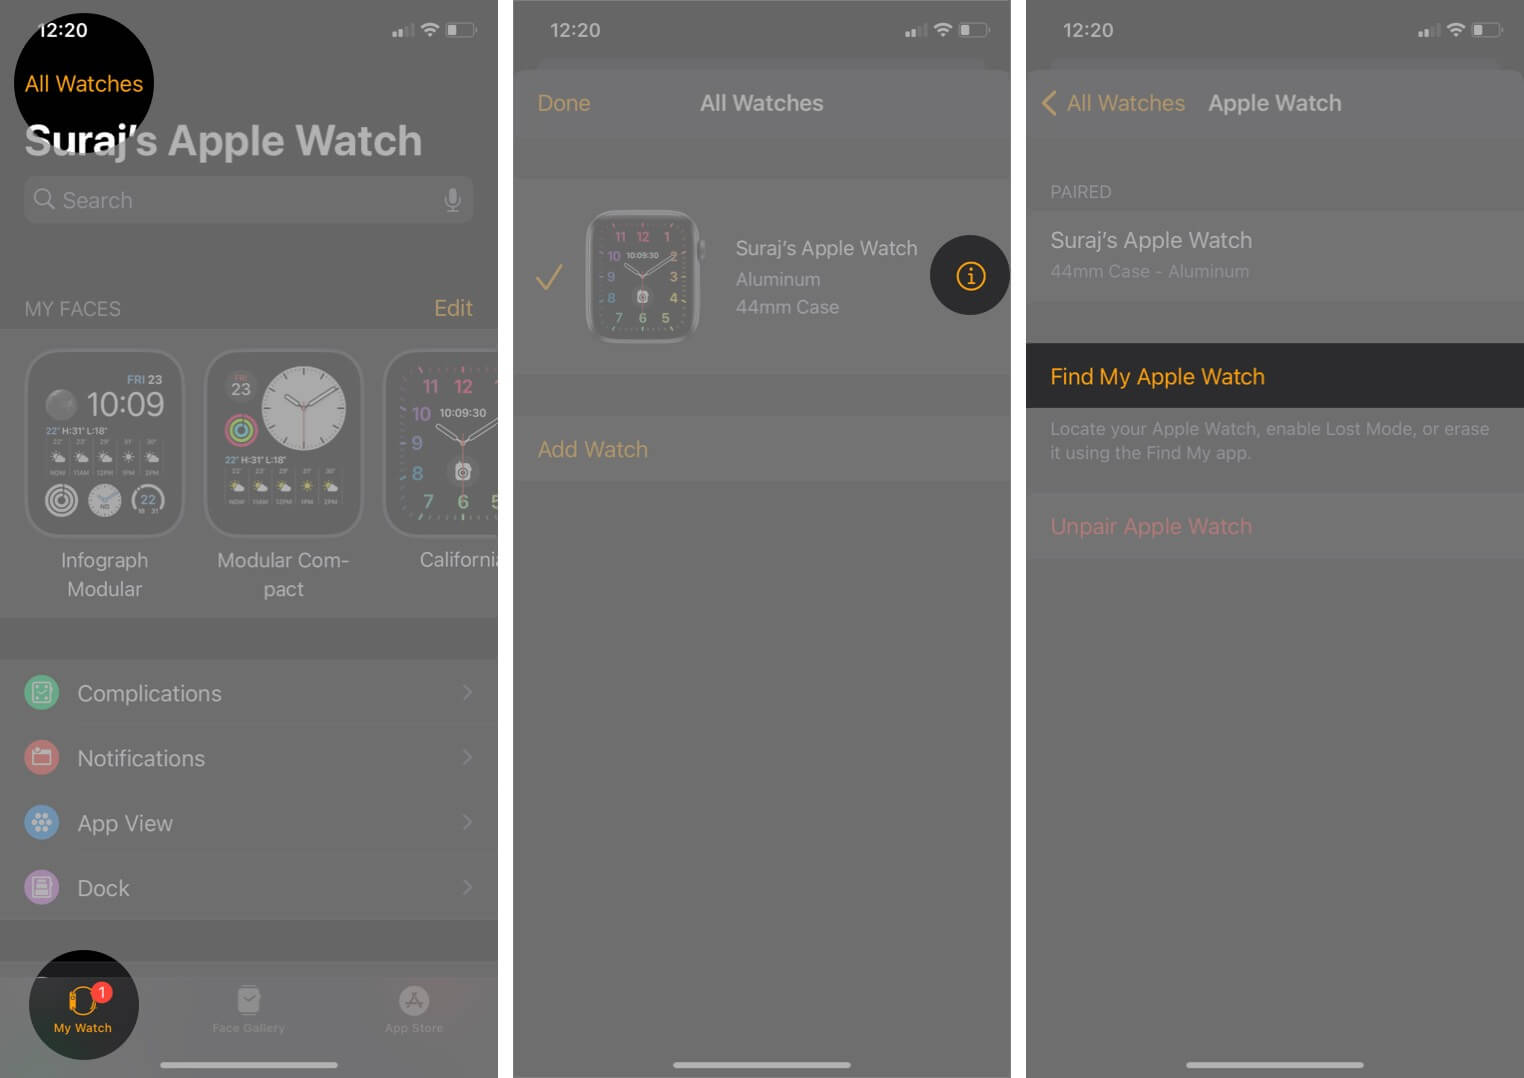 check apple watch activation lock is enabled or not using watch app on paired iphone